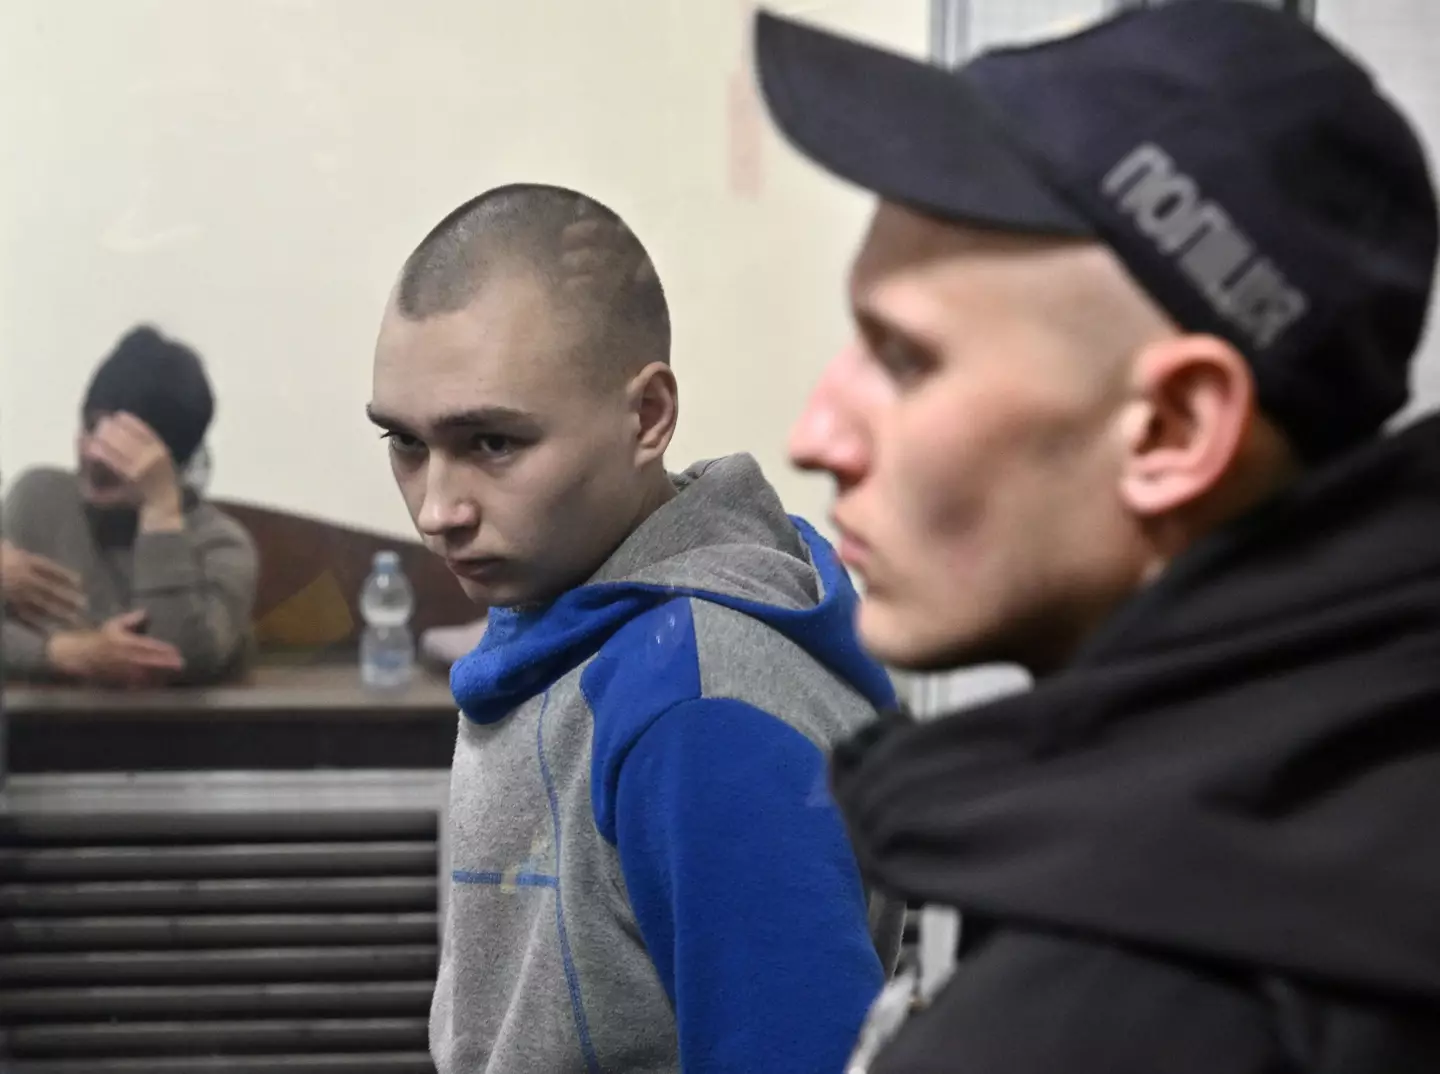 Vadim Shishmarin pleaded guilty and asked for forgiveness.